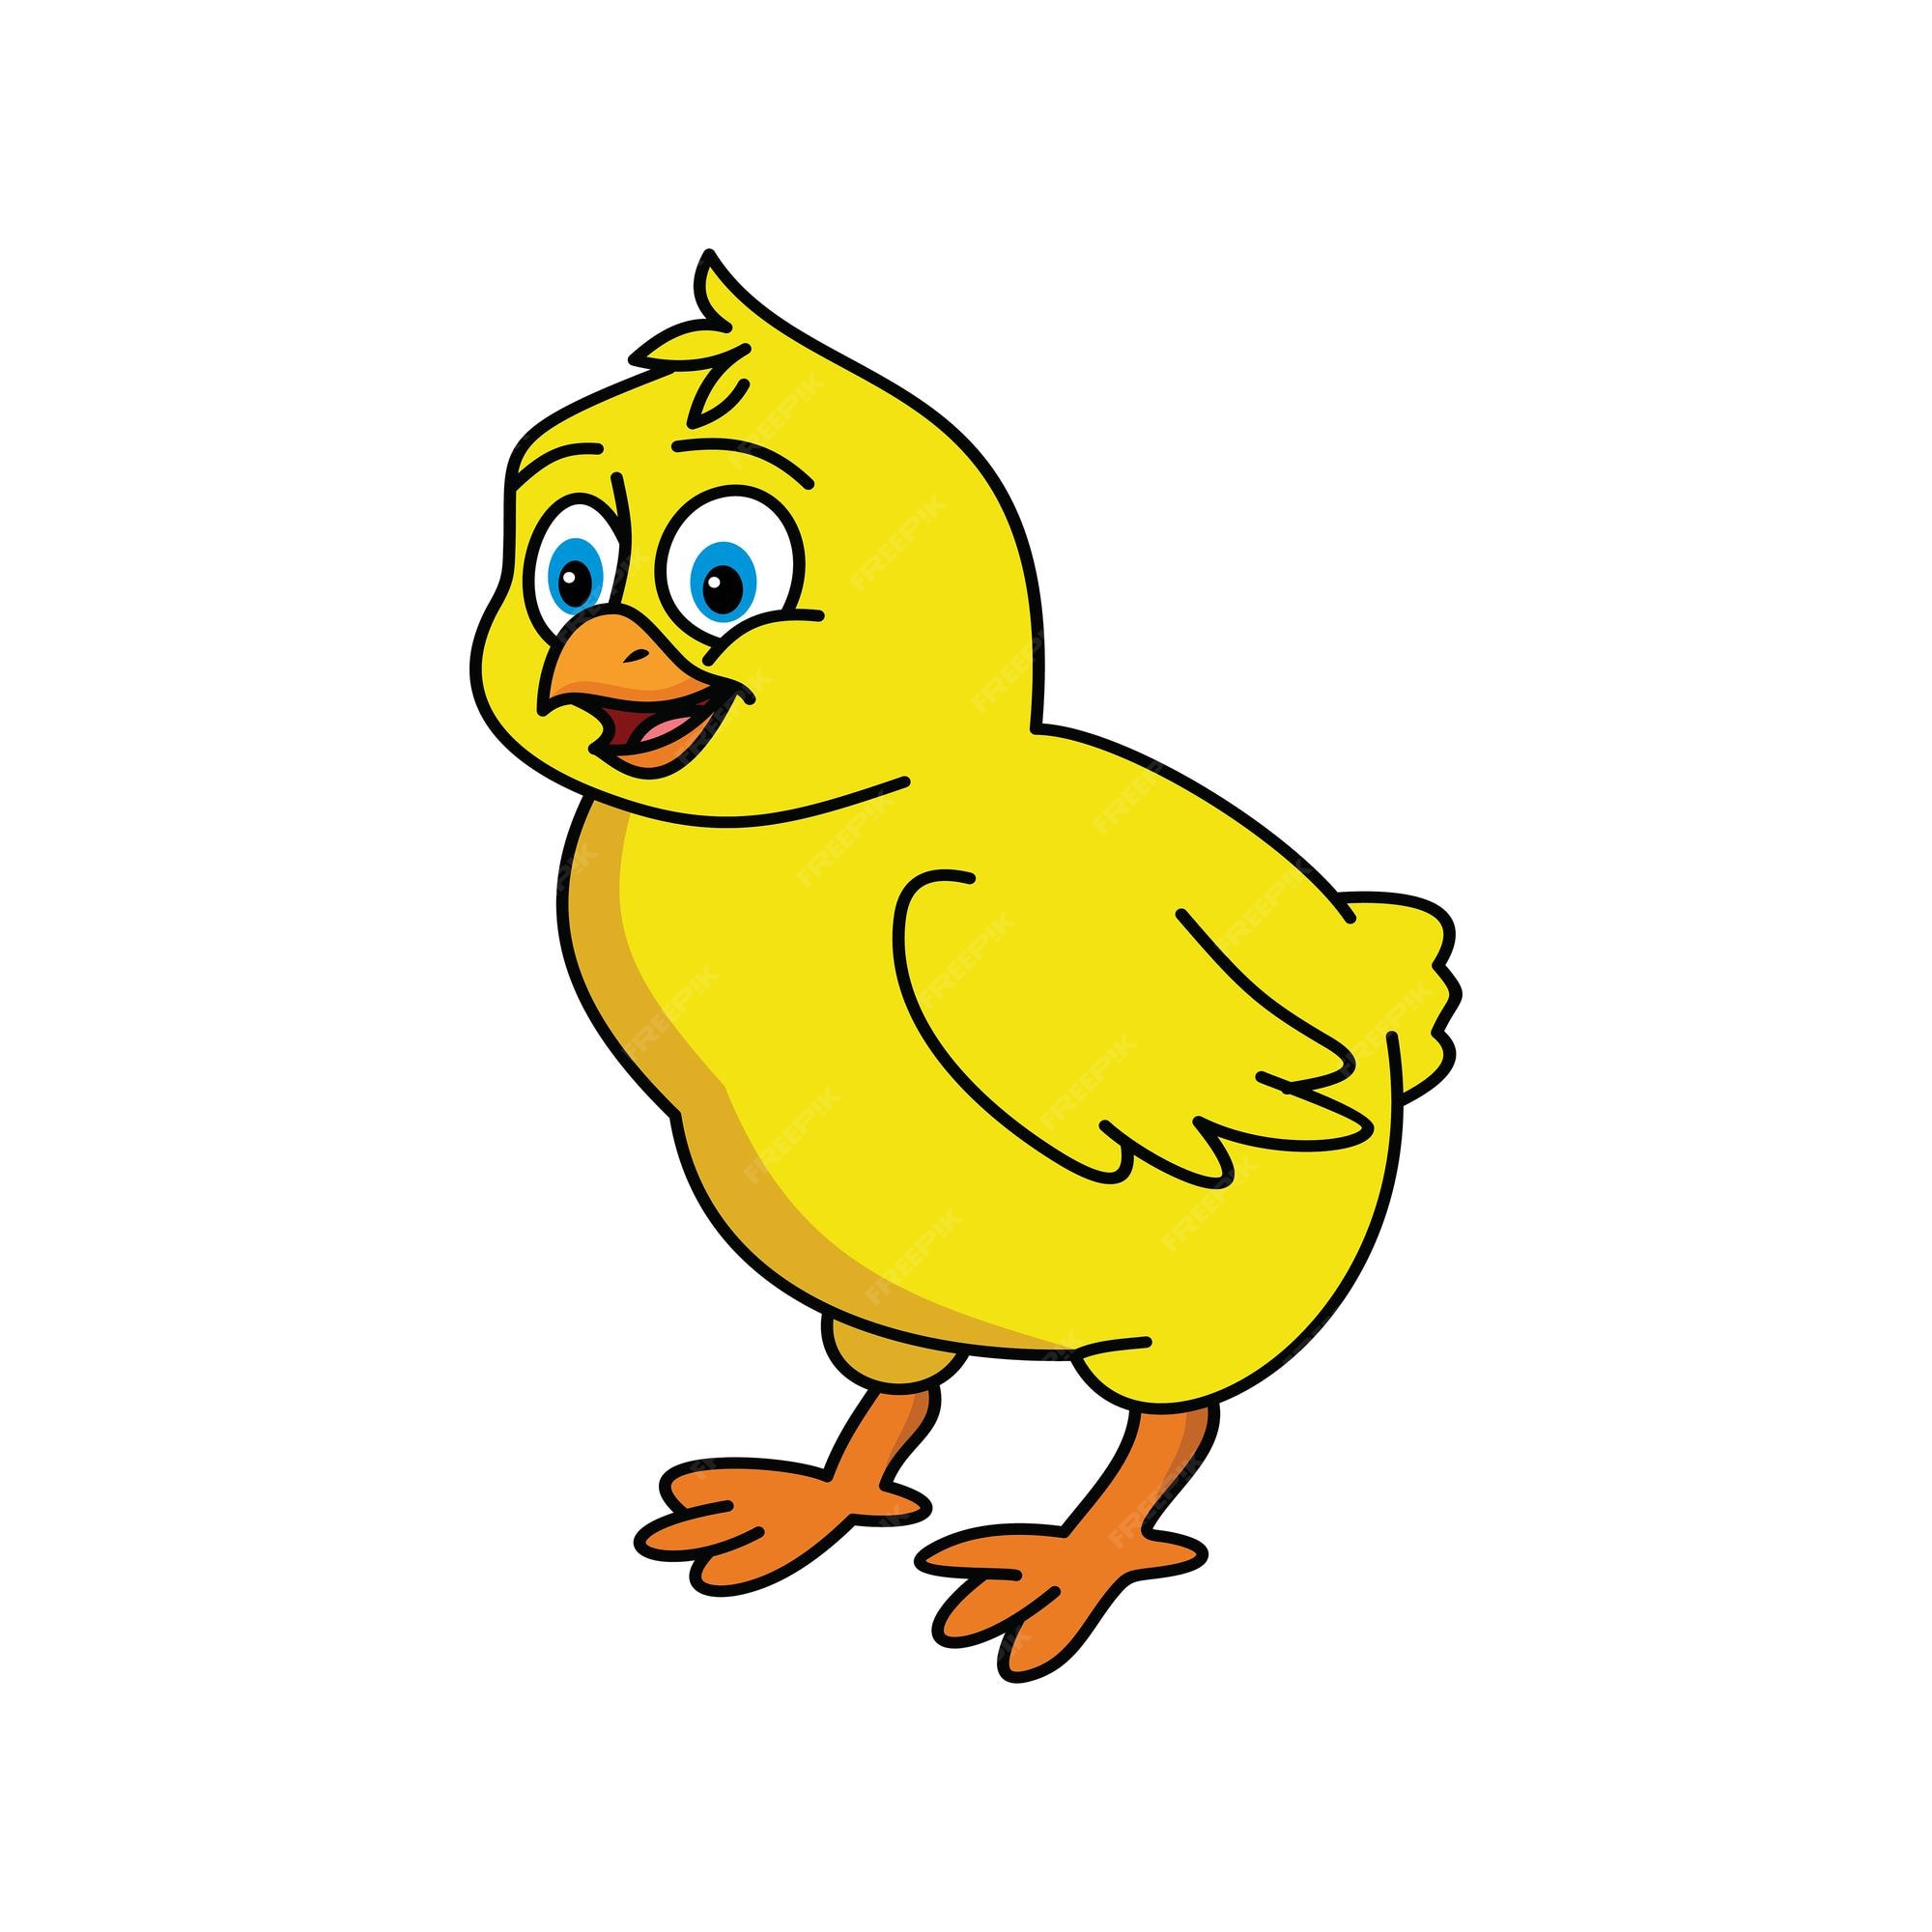 anthony capper add picture of a cartoon chick photo